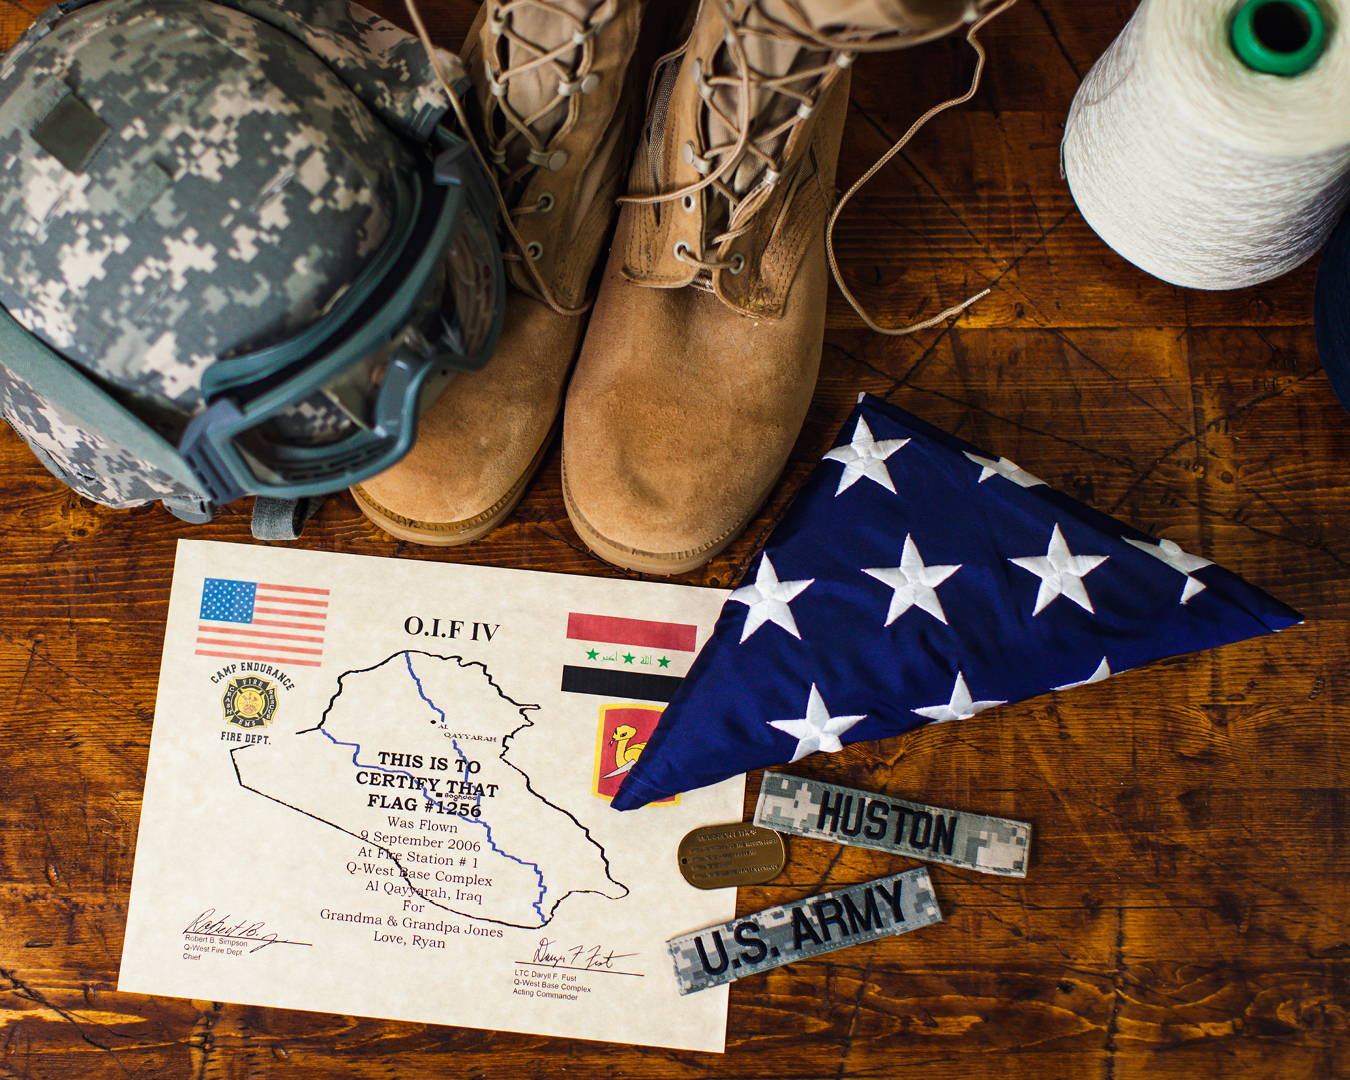 photograph-overhead-shot-of-us-flag-and-military-boots-helmet-and-certification